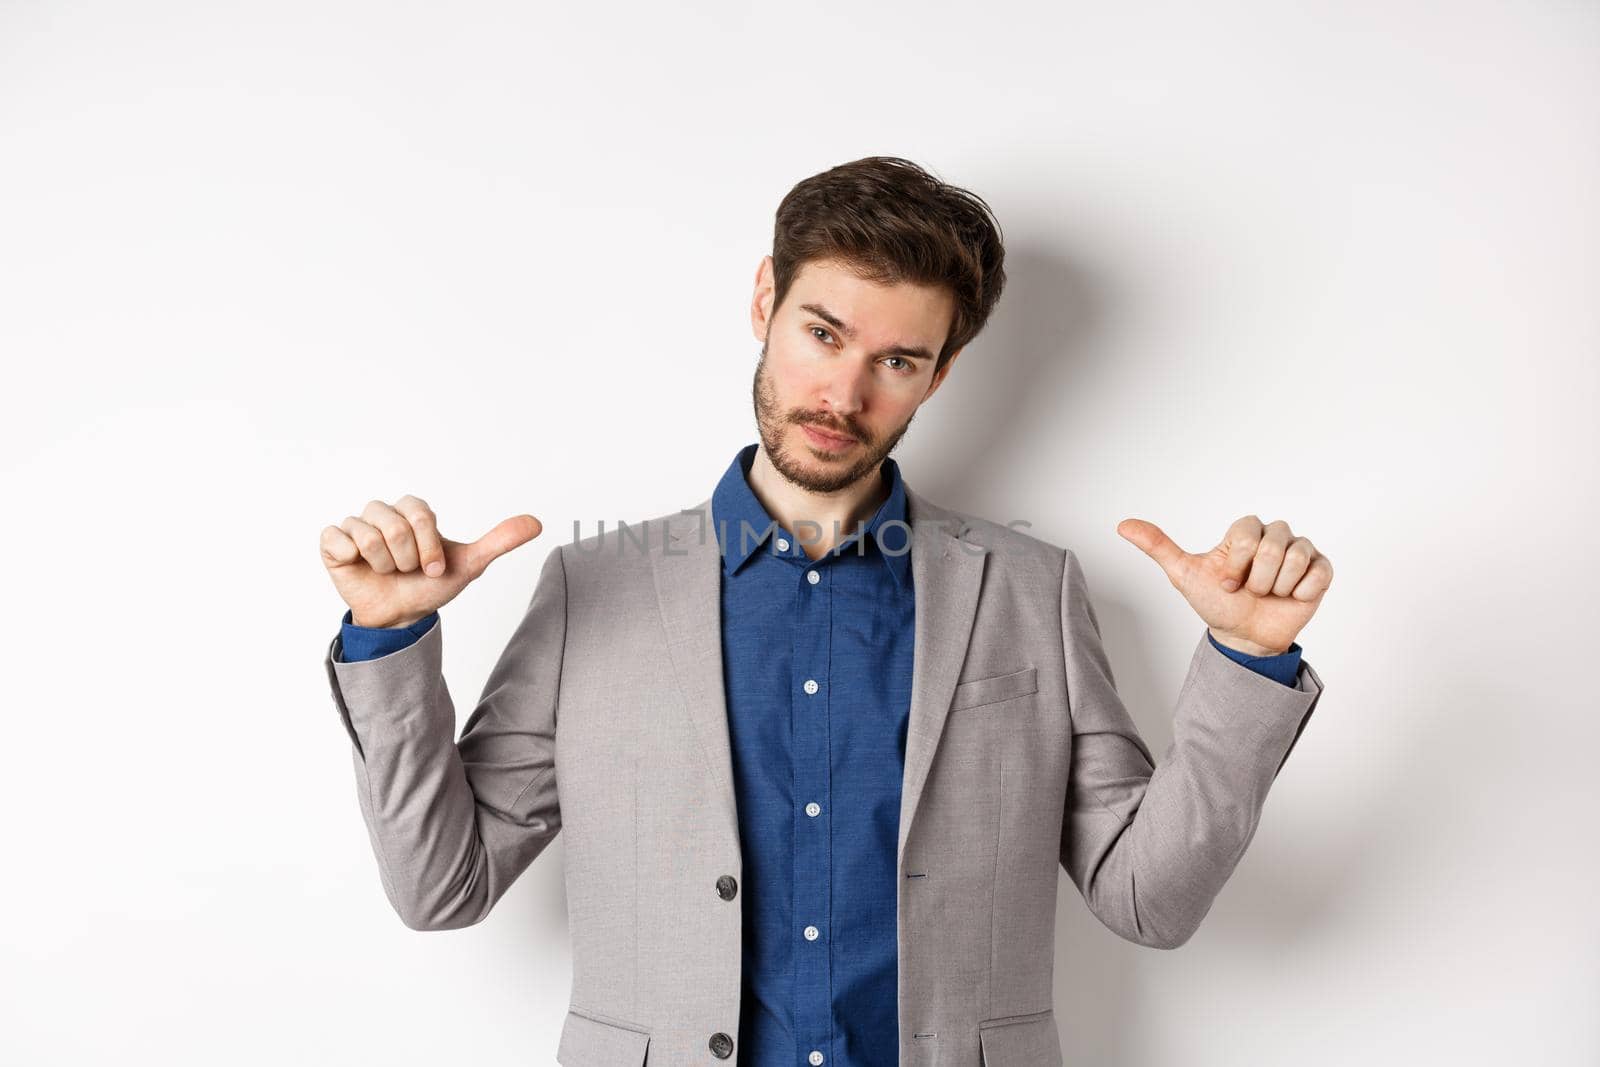 Confident man in business suit looking like professional, pointing at himself, self-promoting, standing on white background.